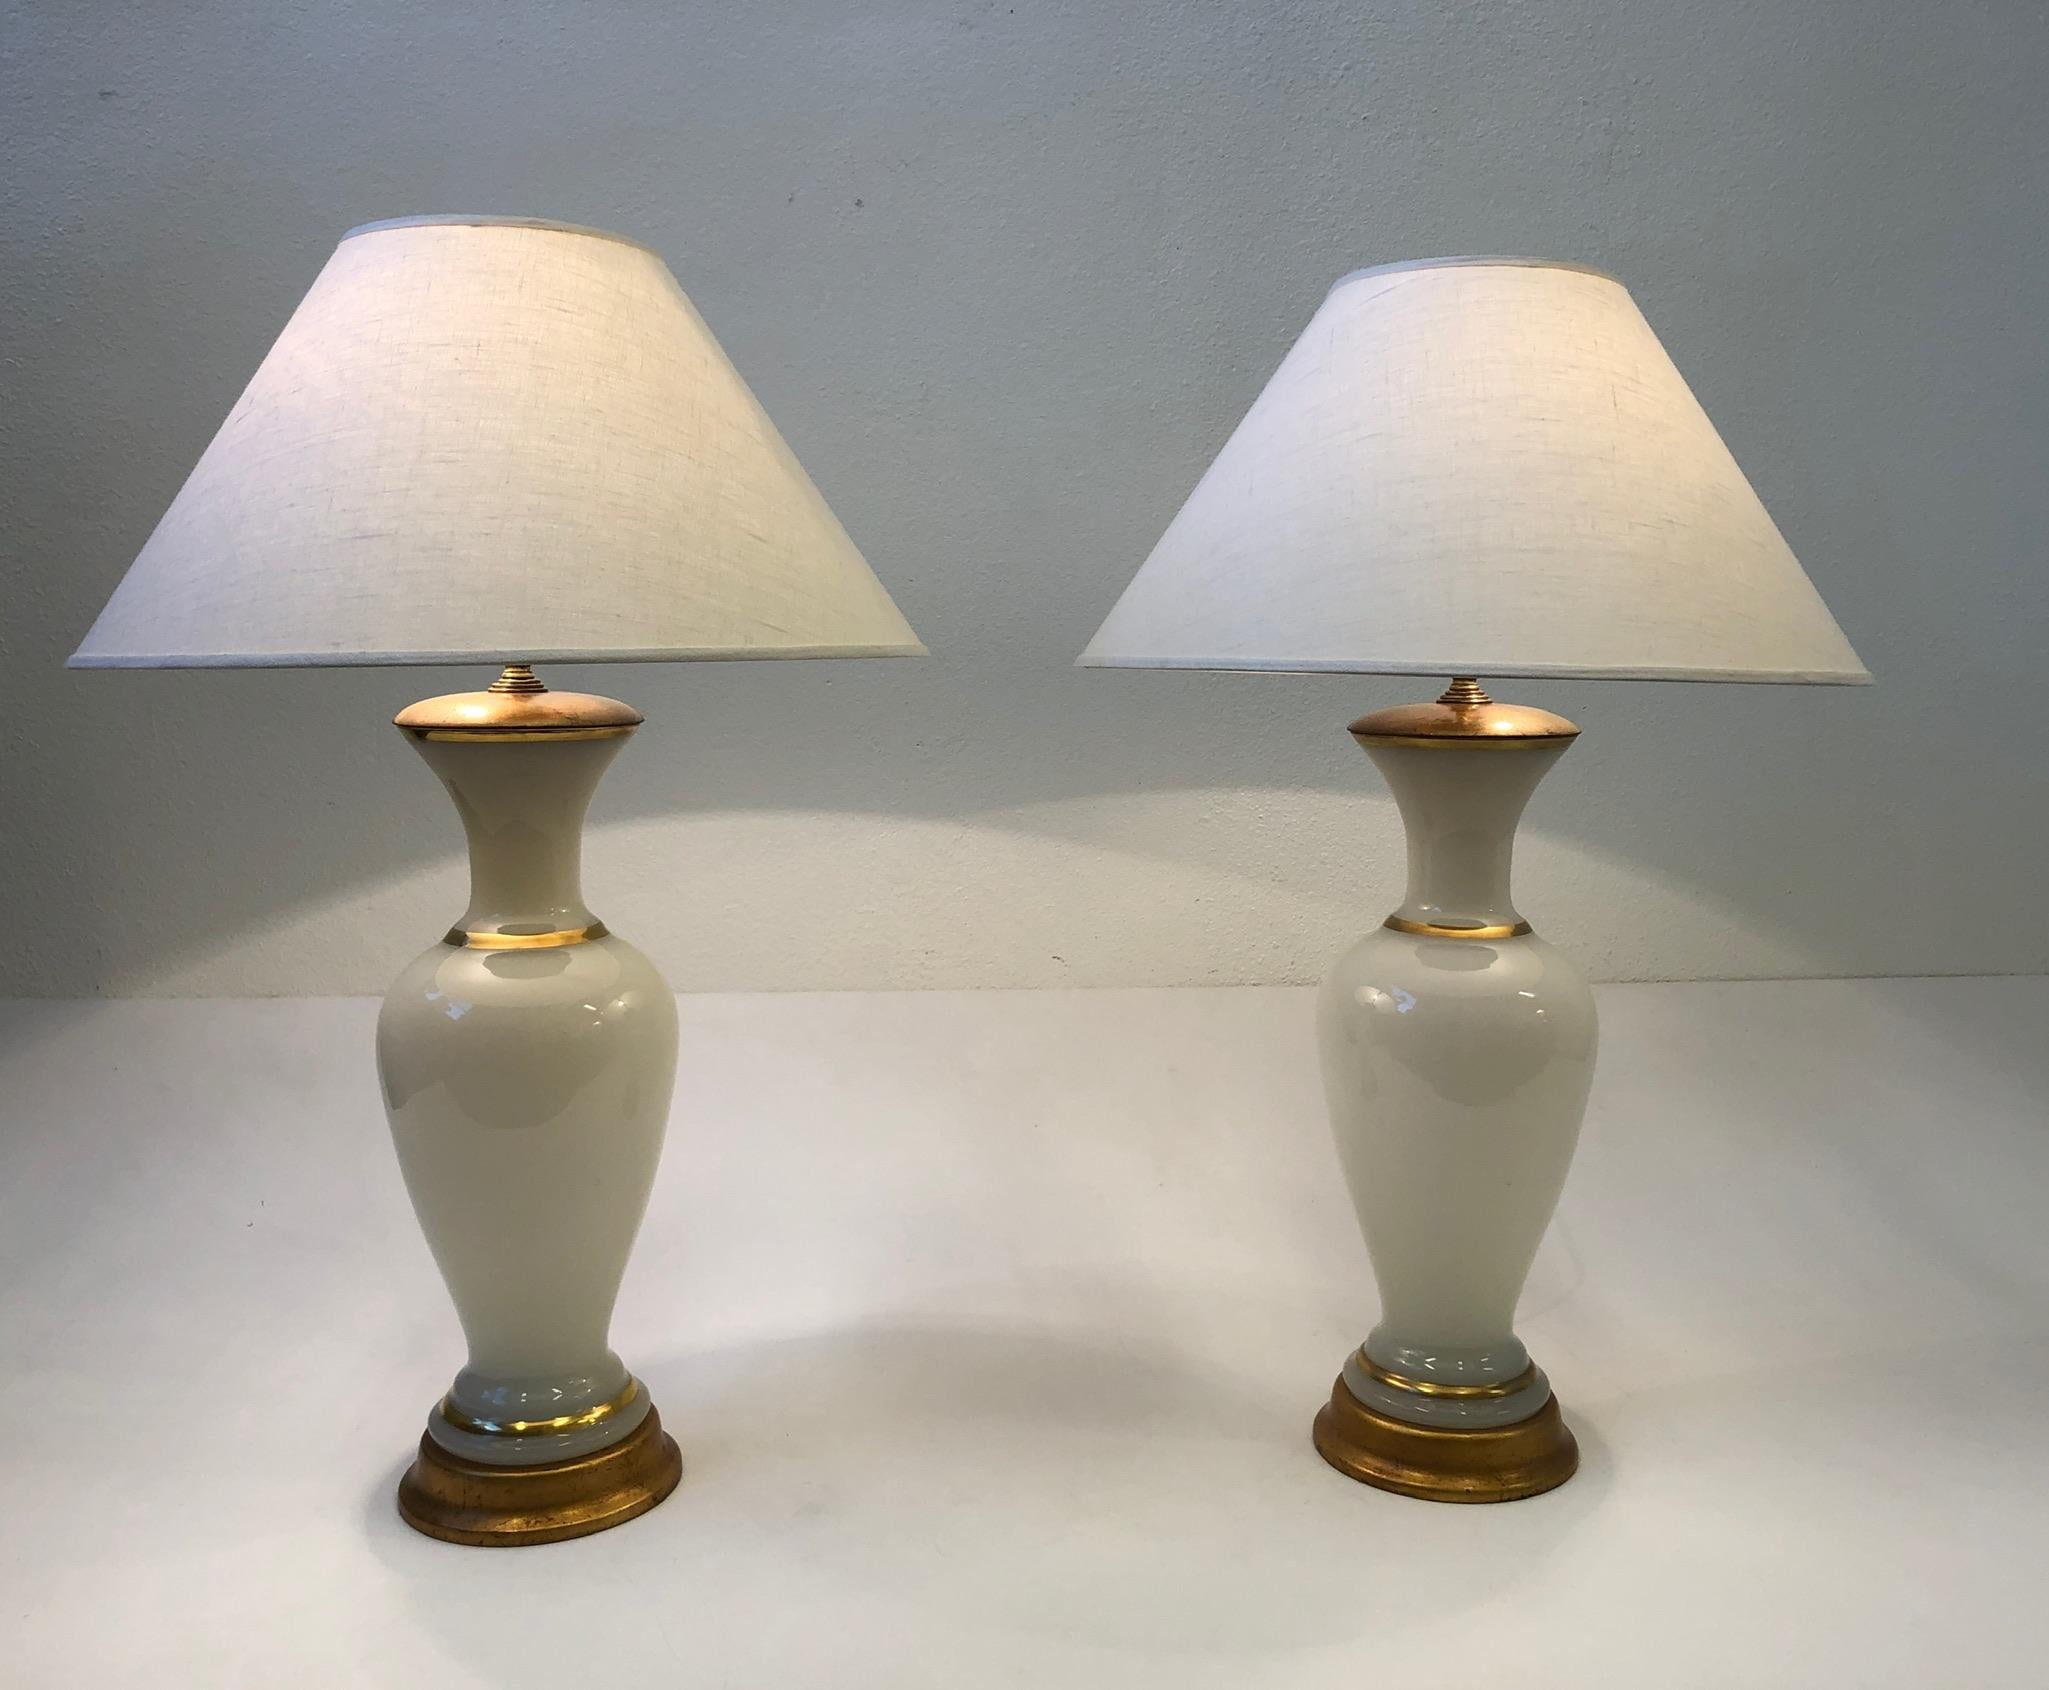 A glamorous pair of Italian white Murano glass and brass table lamps designed by Marbro Lamp Company in the 1960s. The lamps are constructed of Murano glass that’s hand painted with real gold stripes, brass hardware and the bases are gilded wood.